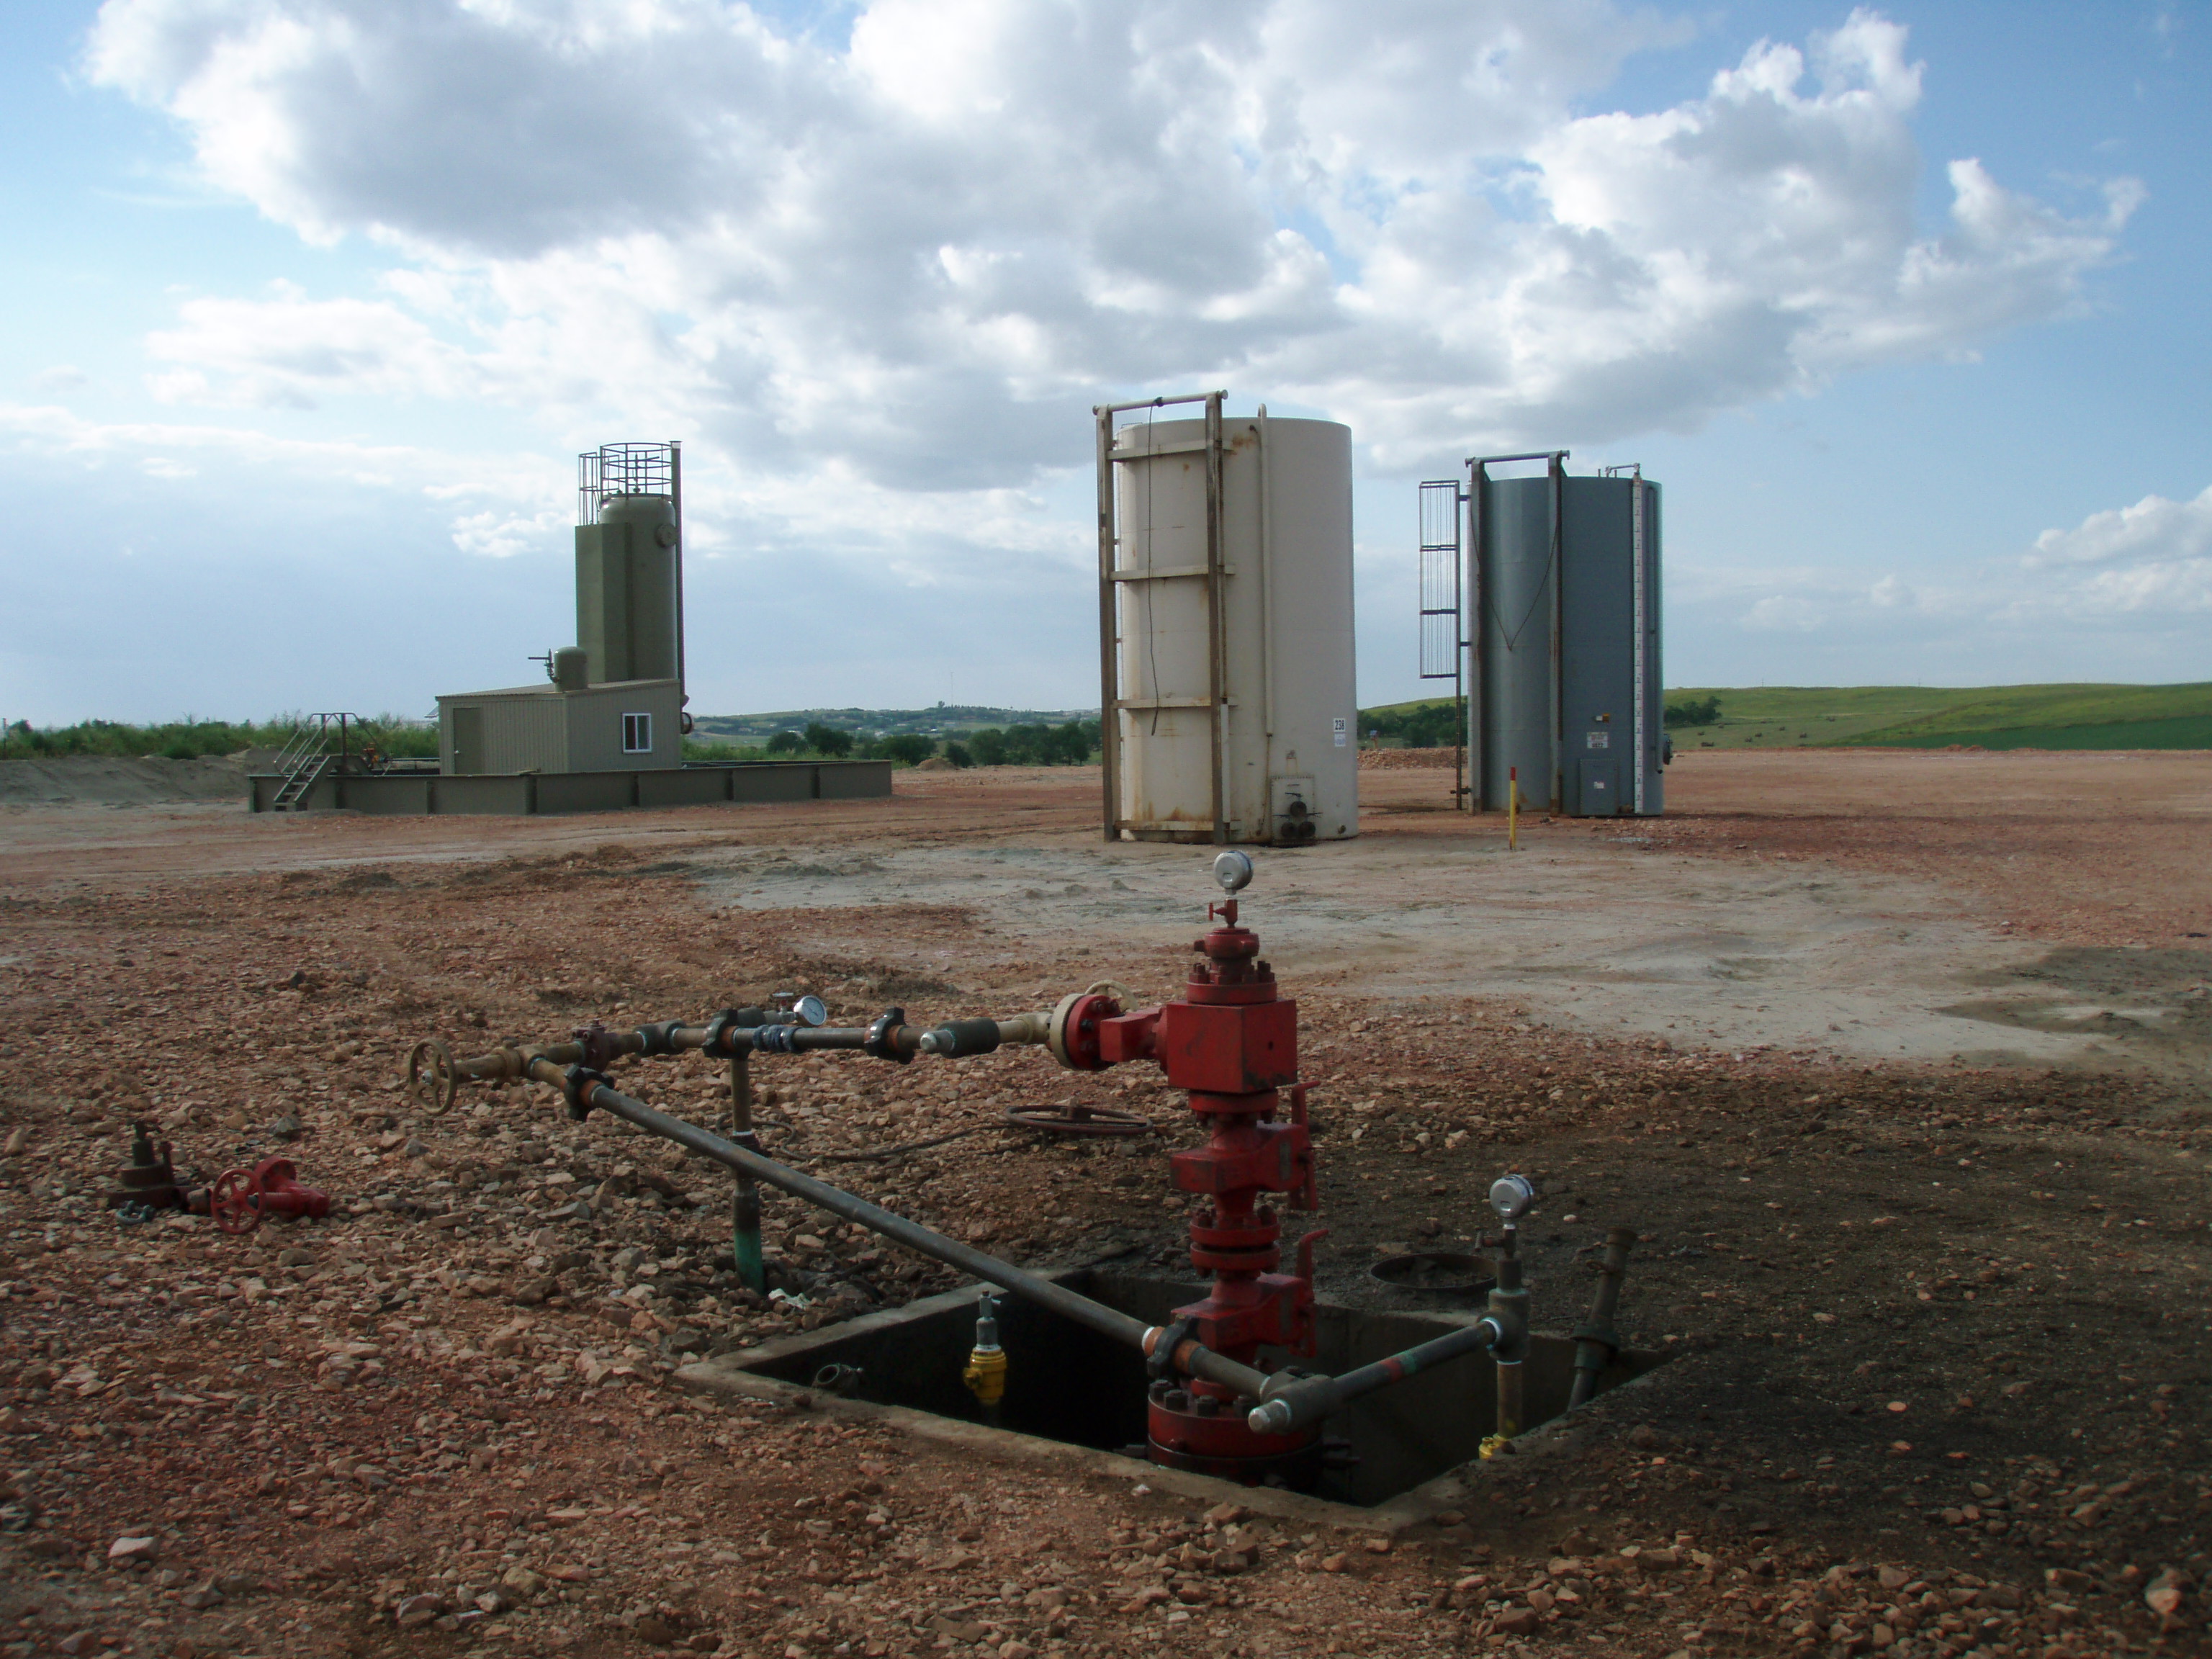 Image: Earthquakes in Oklahoma are manmade, strongly linked to fracking wastewater injection: Study